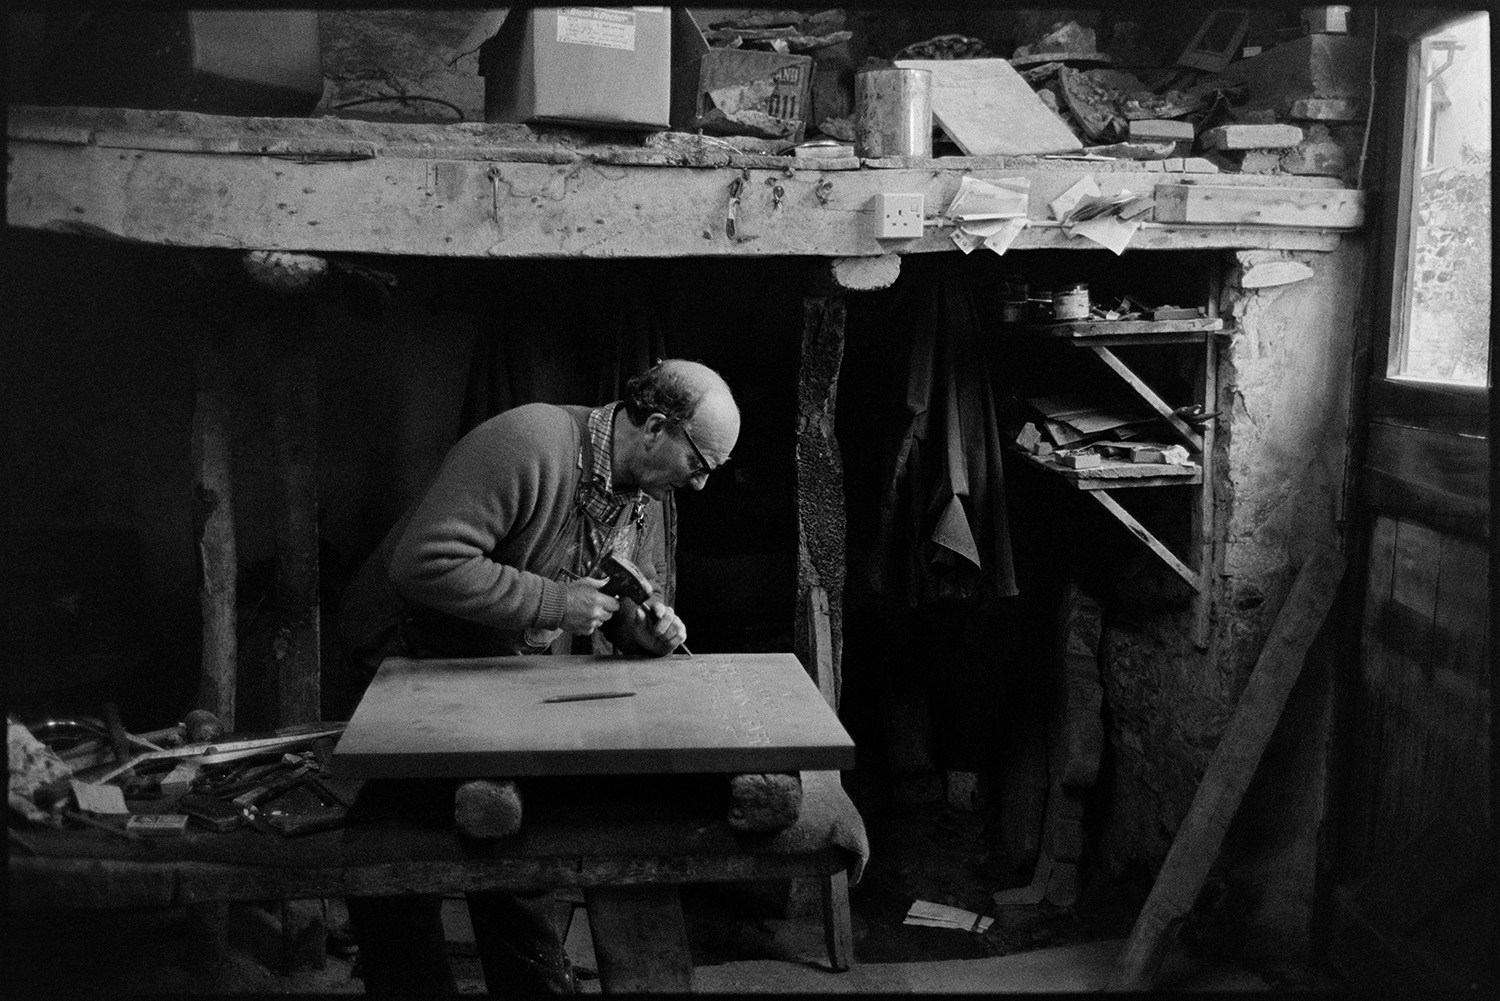 Monumental mason at work on headstone in workshop and loading stone into car. 
[Bruce Edyvean, a monumental mason, working on a headstone for a grave, in his workshop in New Street, Torrington. The gravestone is resting on a workbench and he is using a hammer and chisel to engrave the wording on the stone.]